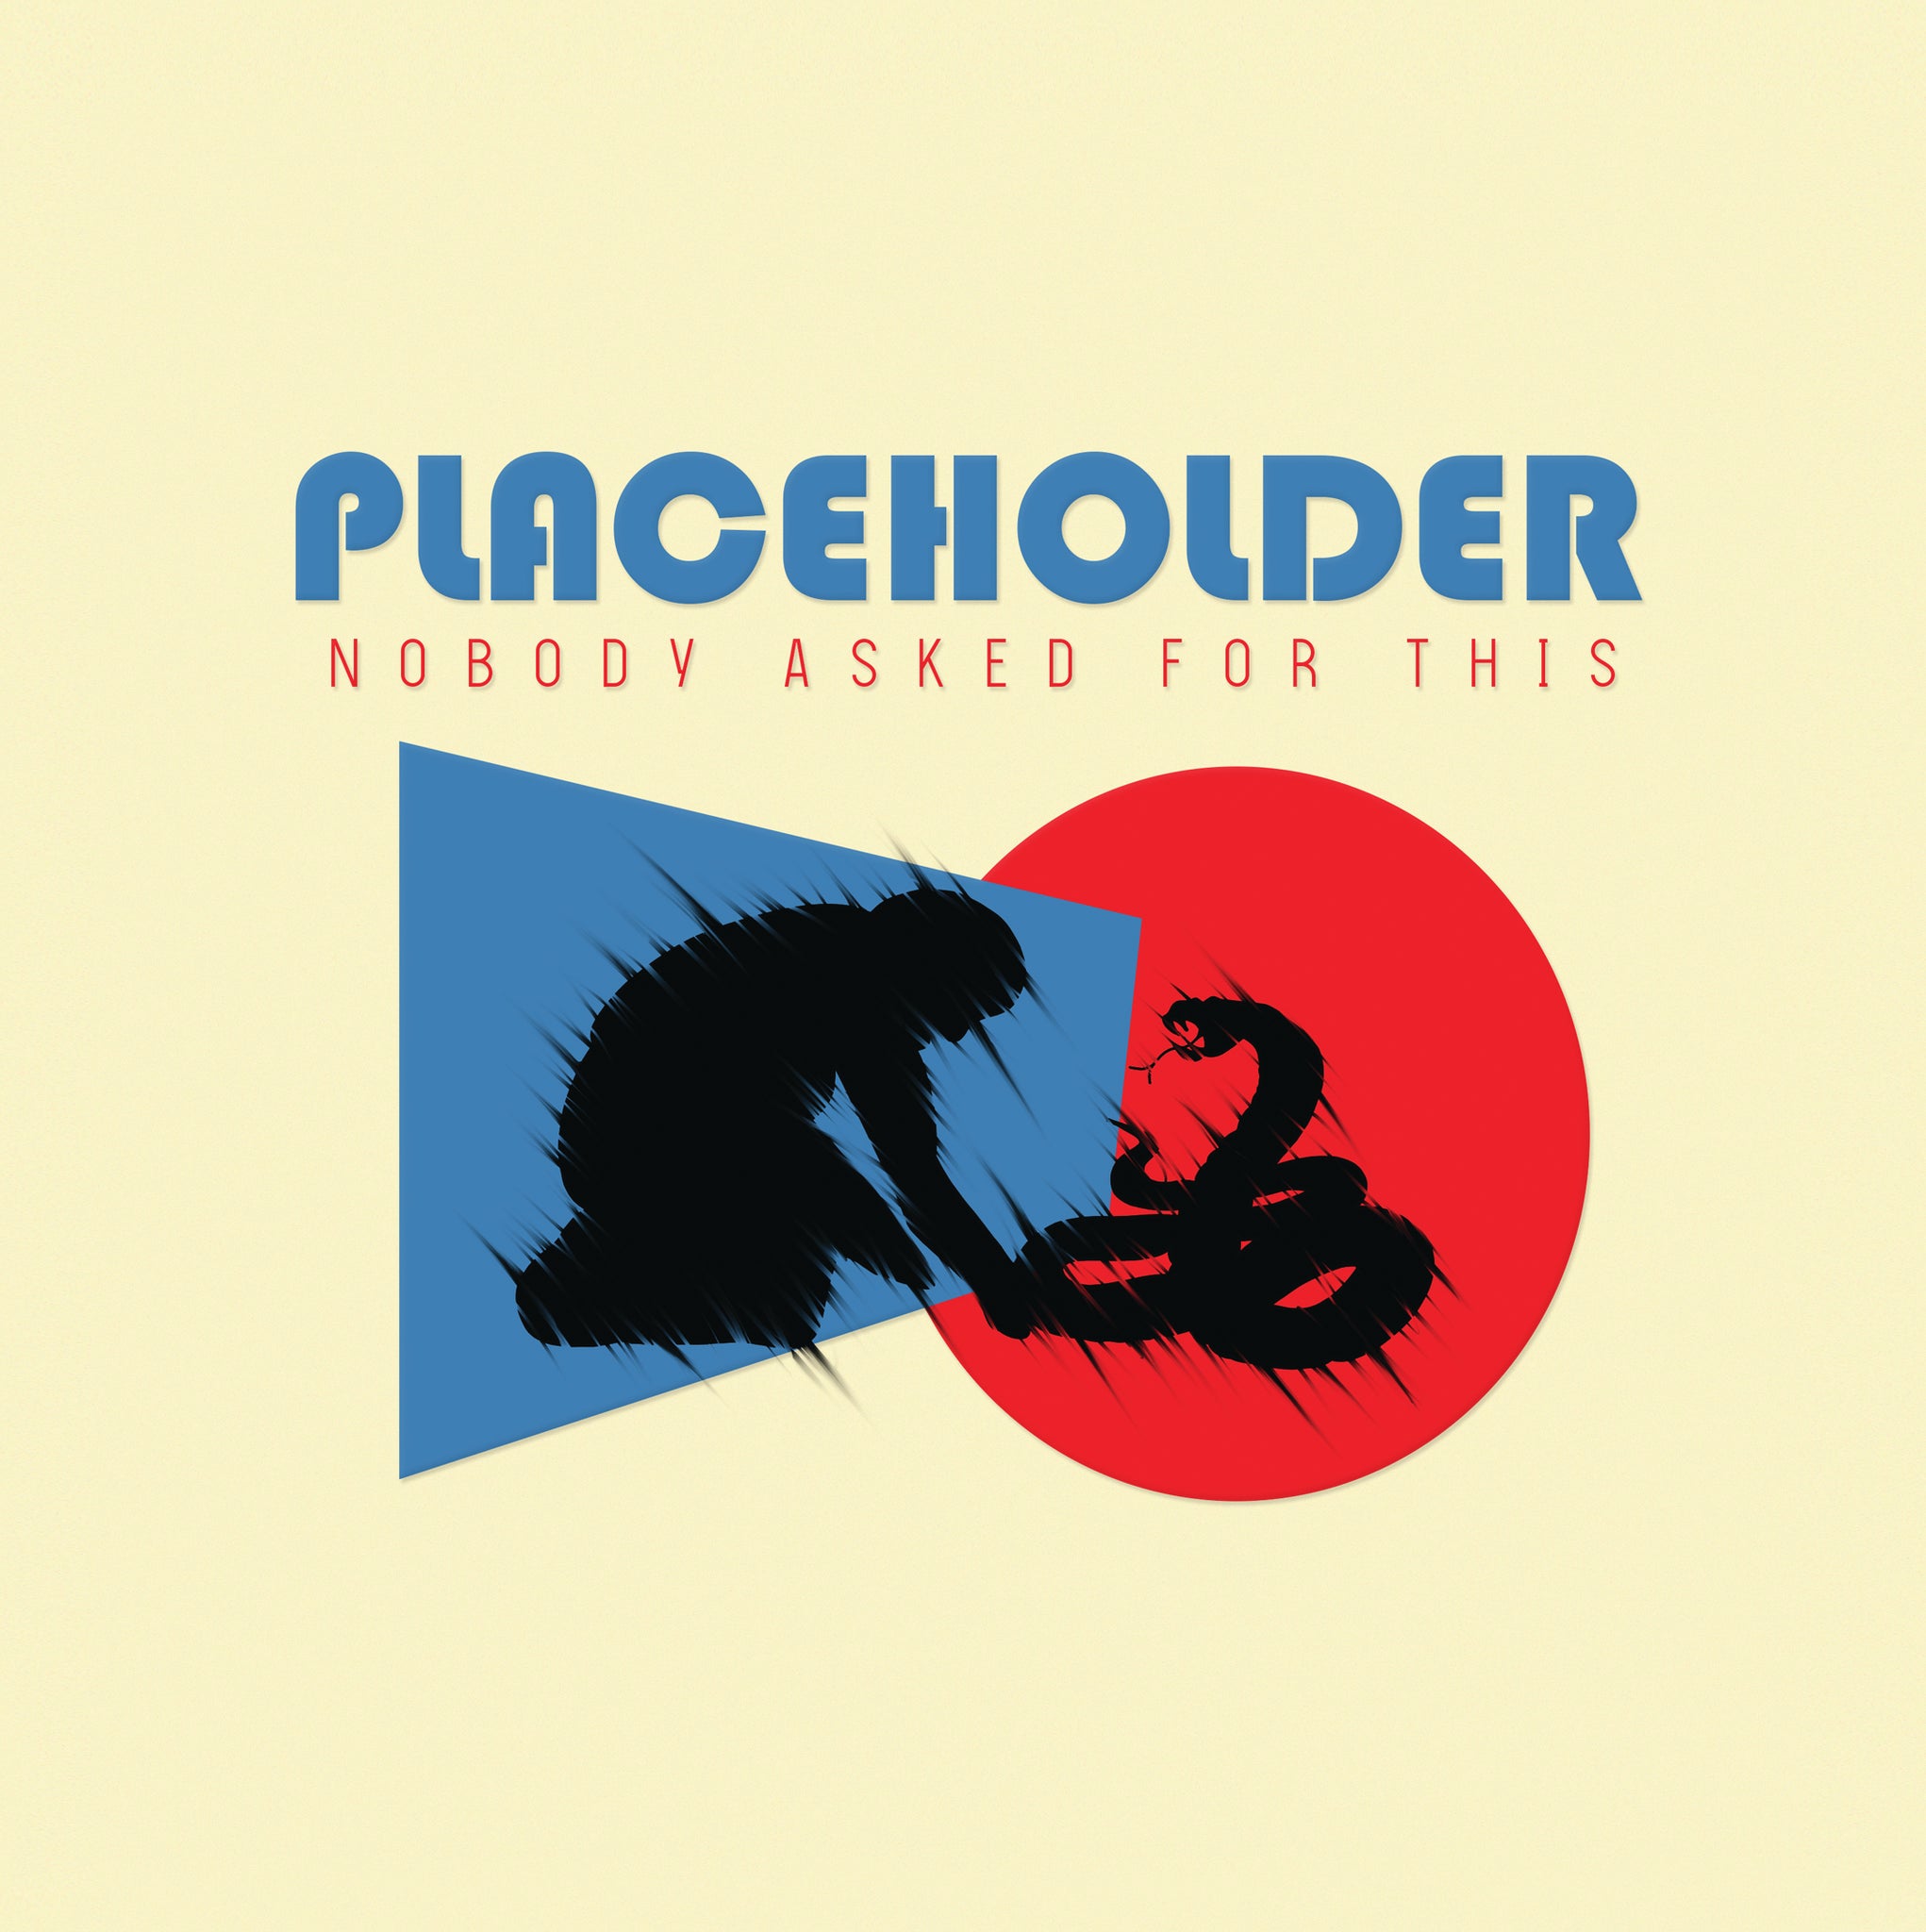 PLACEHOLDER "NOBODY ASKED FOR THIS" 7" SINGLE